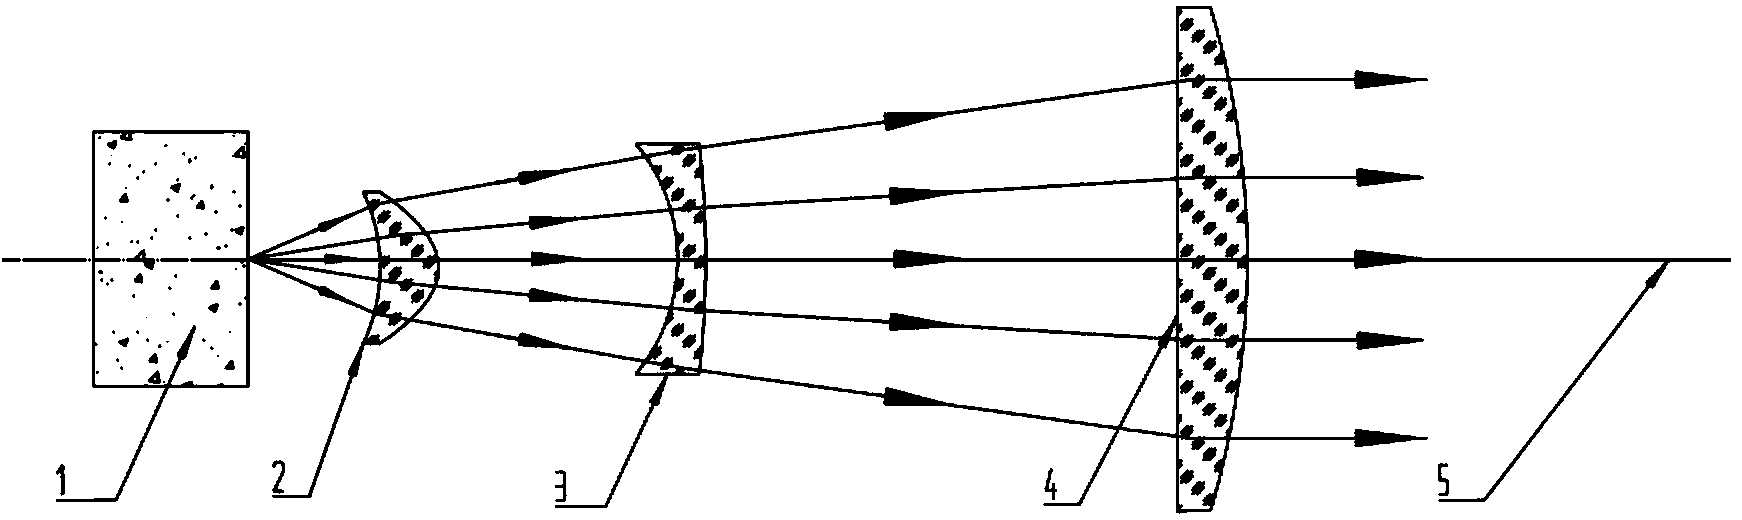 Collimating and beam expanding device for semiconductor laser sources of laser radar